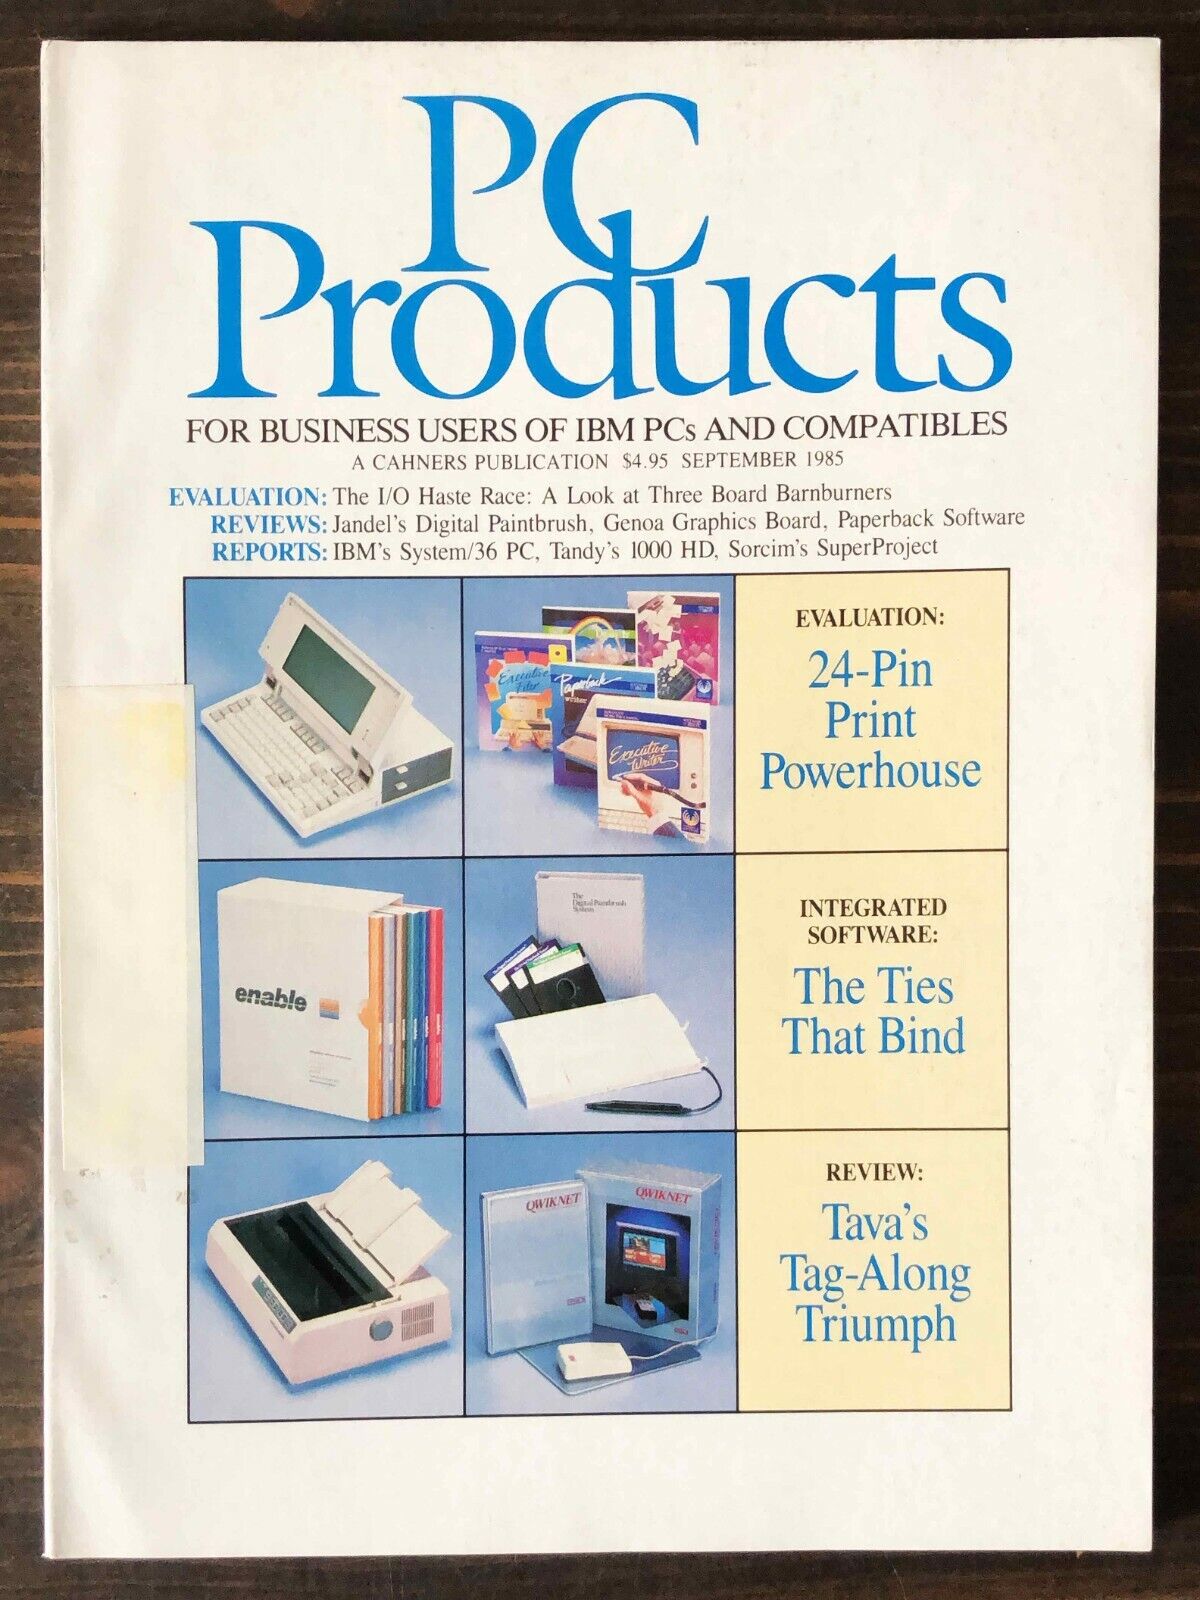 PC Products - September 1985, Volume II, Number 9